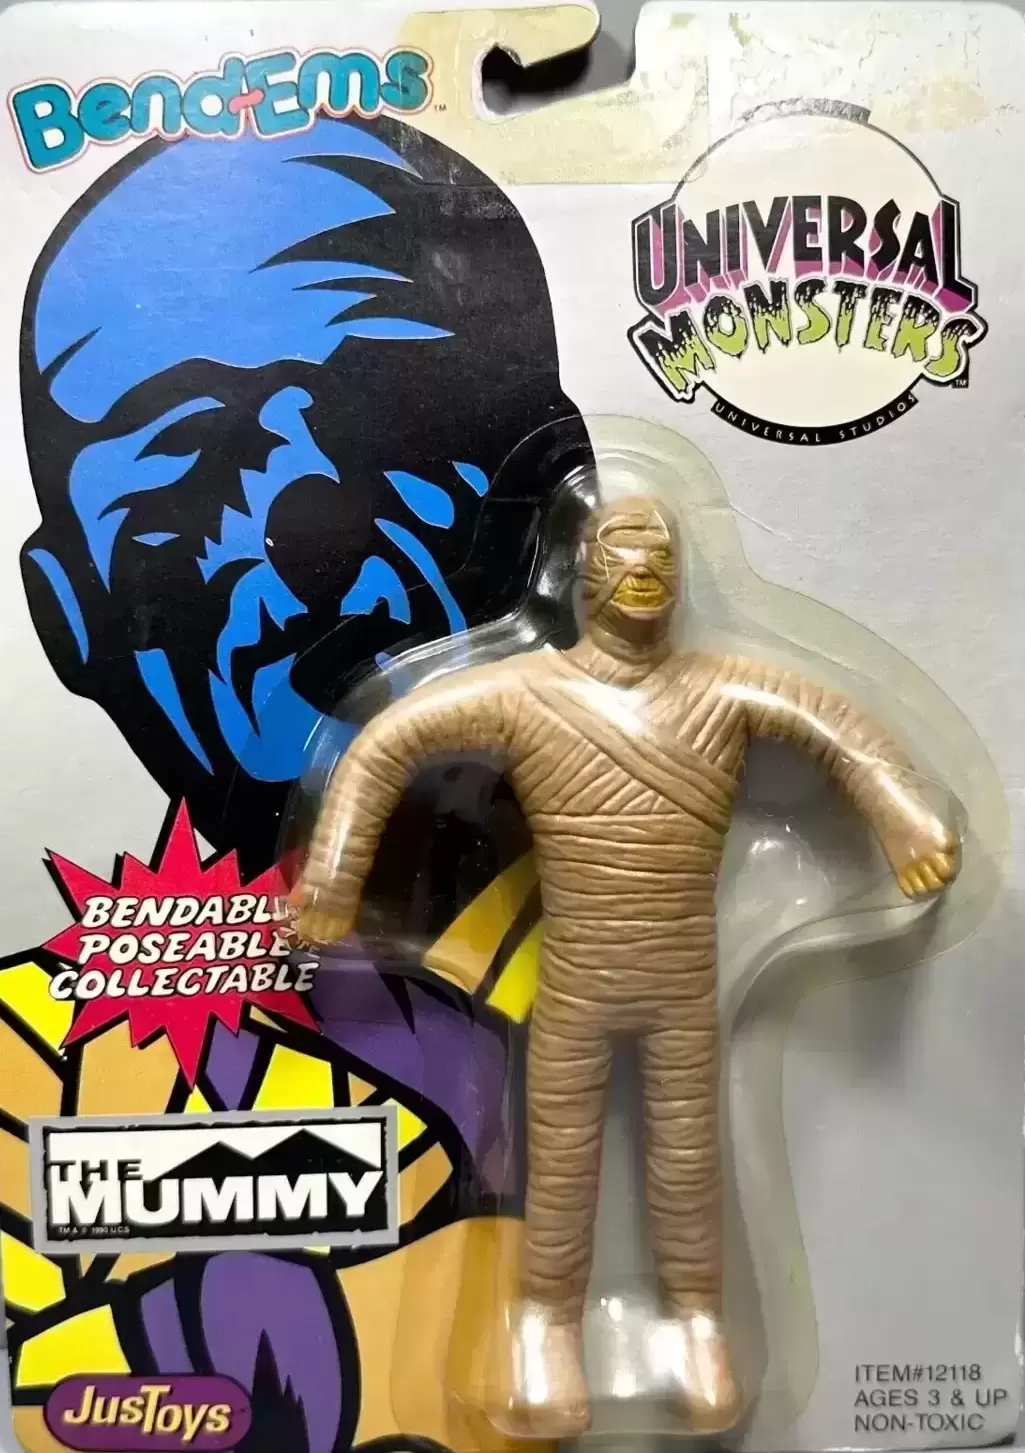 Bend-Ems - Universal Monsters - The Mummy